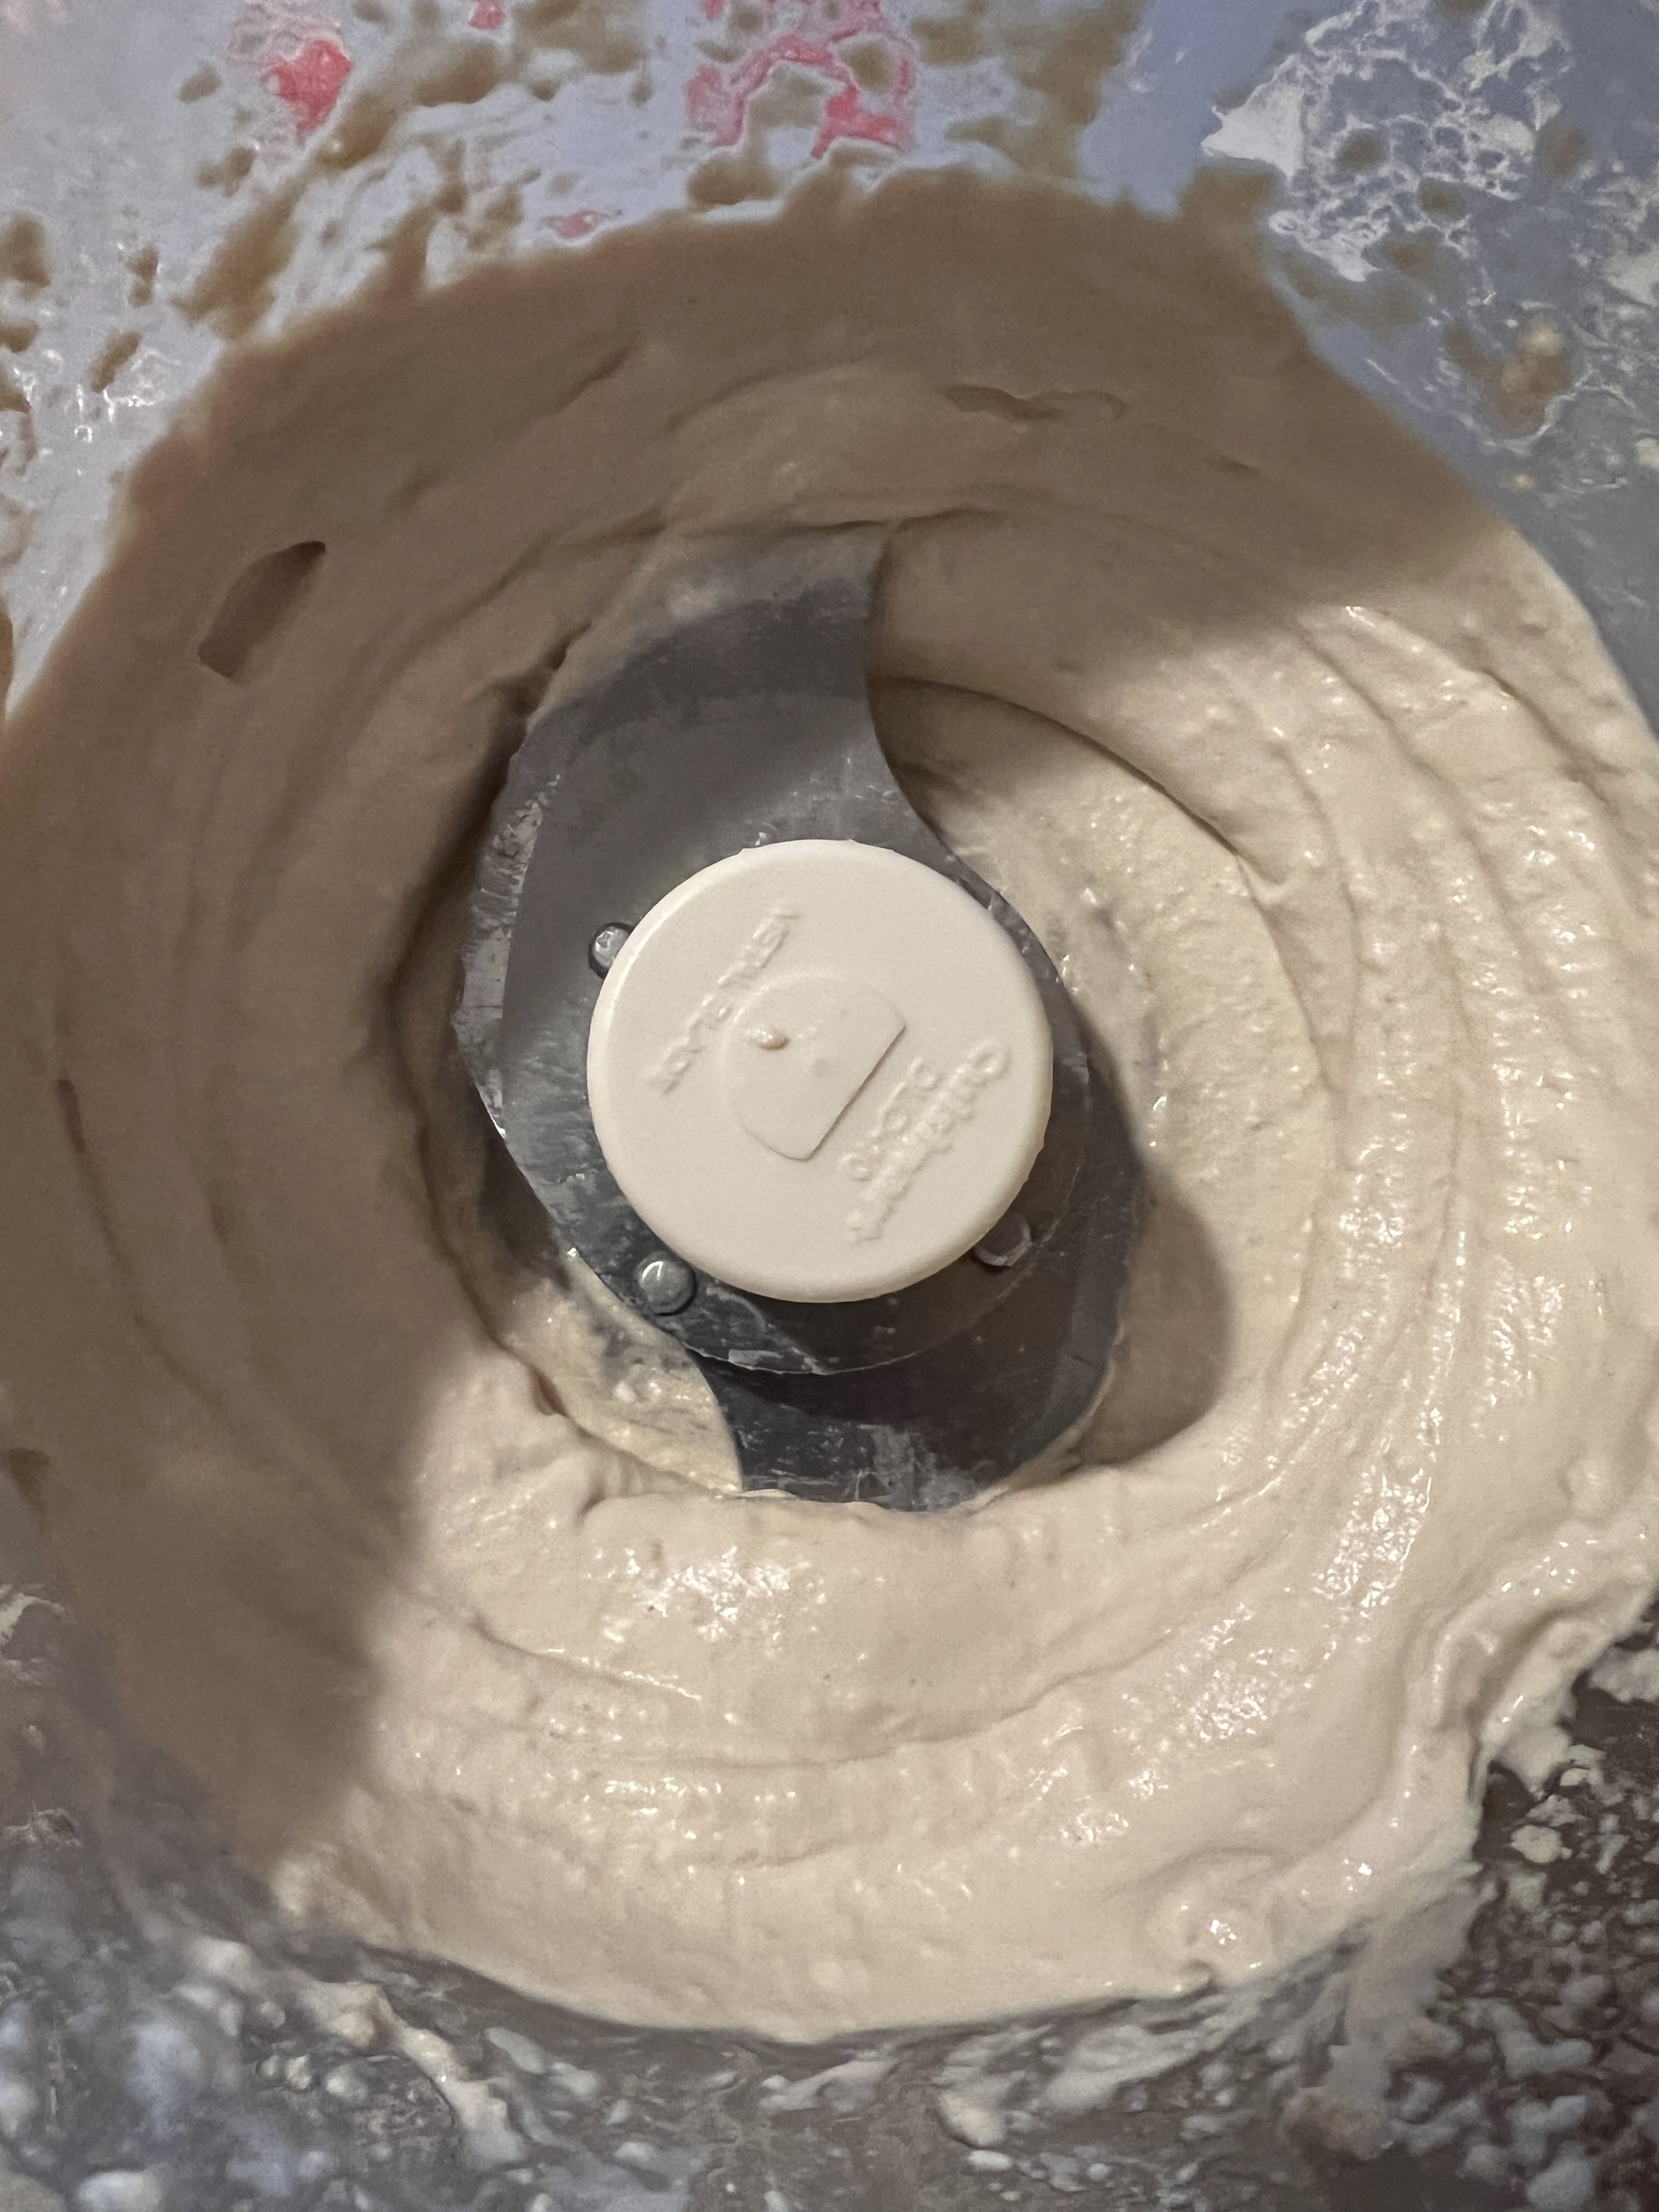 Tahini mixture is light, creamy, and almost fluffy after adding the ice cube.